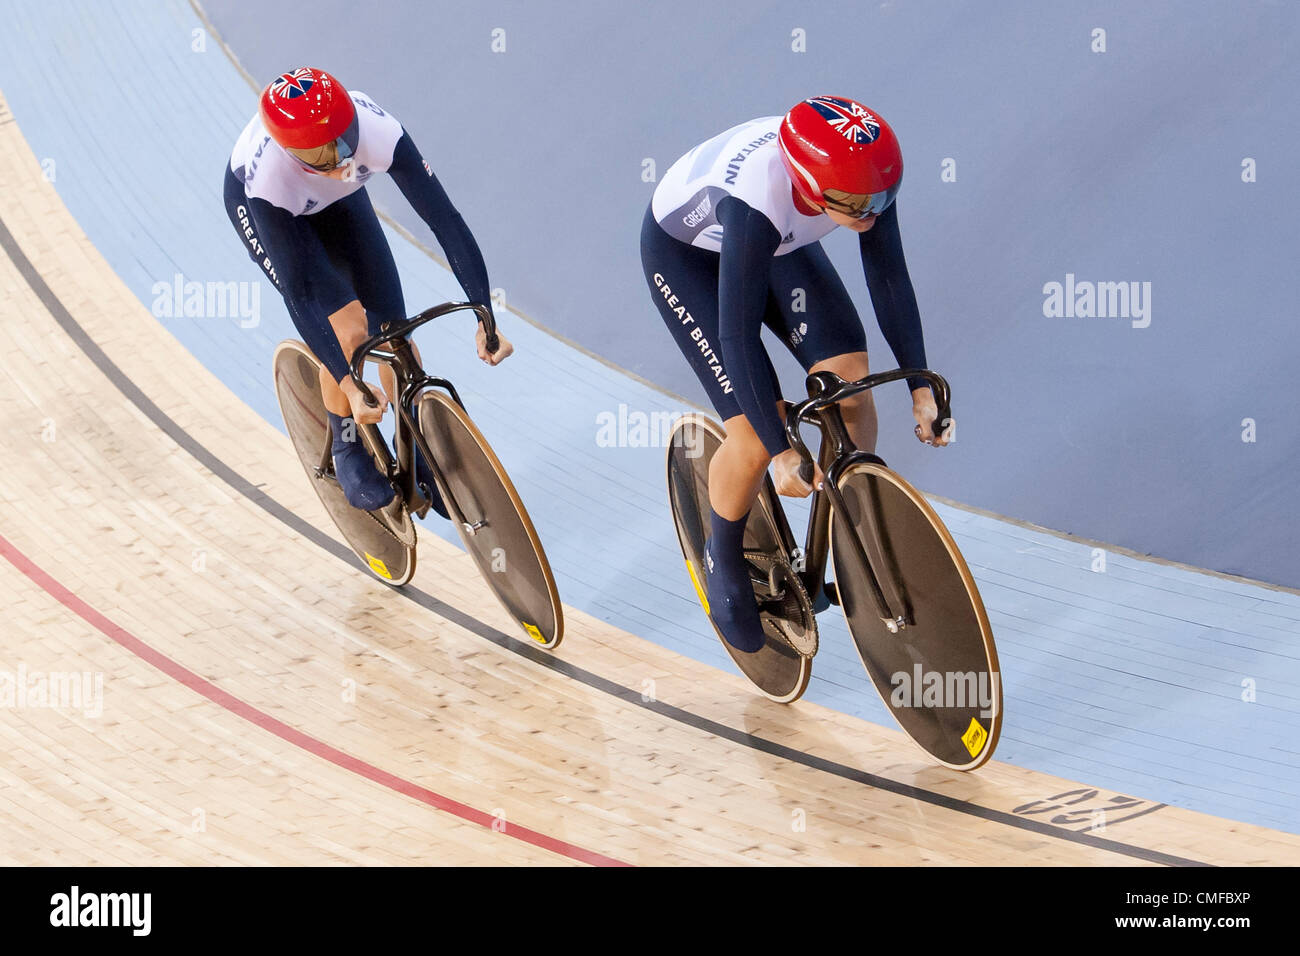 UK. 02.08.2012 Stratford, England. Great Britains Victoria Pendleton (GBR) and Great Britains Jessica Varnish (GBR) compete in the Womens Team Sprint Semi Final during the track cycling Competition on day 6 of the London 2012 Olympic Games at the Velodrome in the Olympic Park. Stock Photo